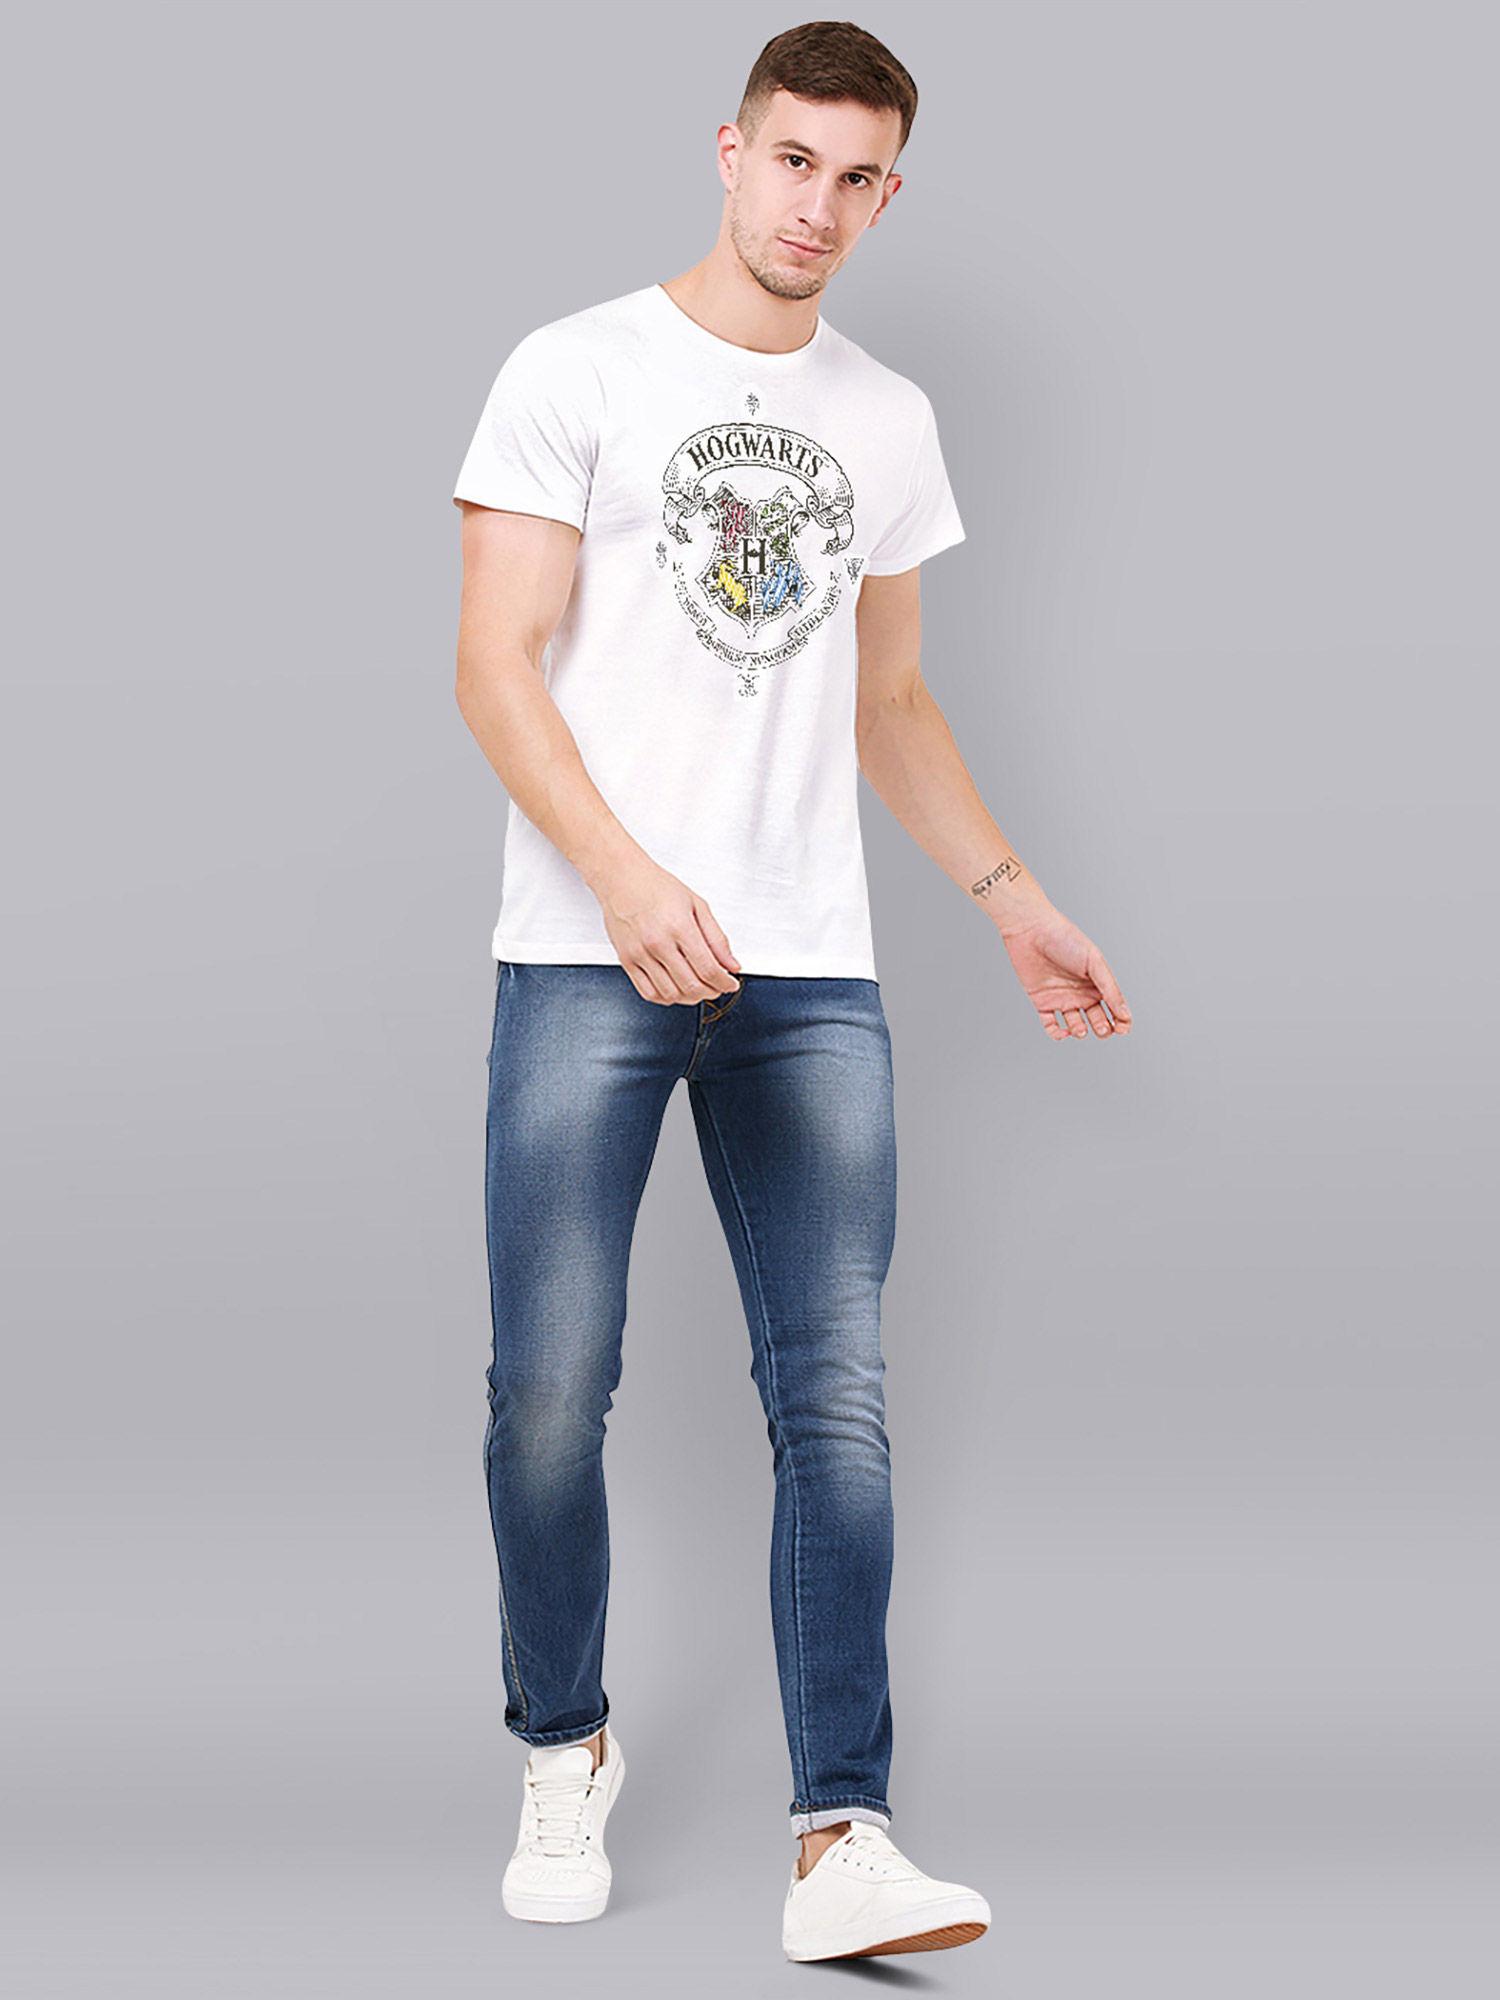 harry-potter-featured-white-tshirt-for-men